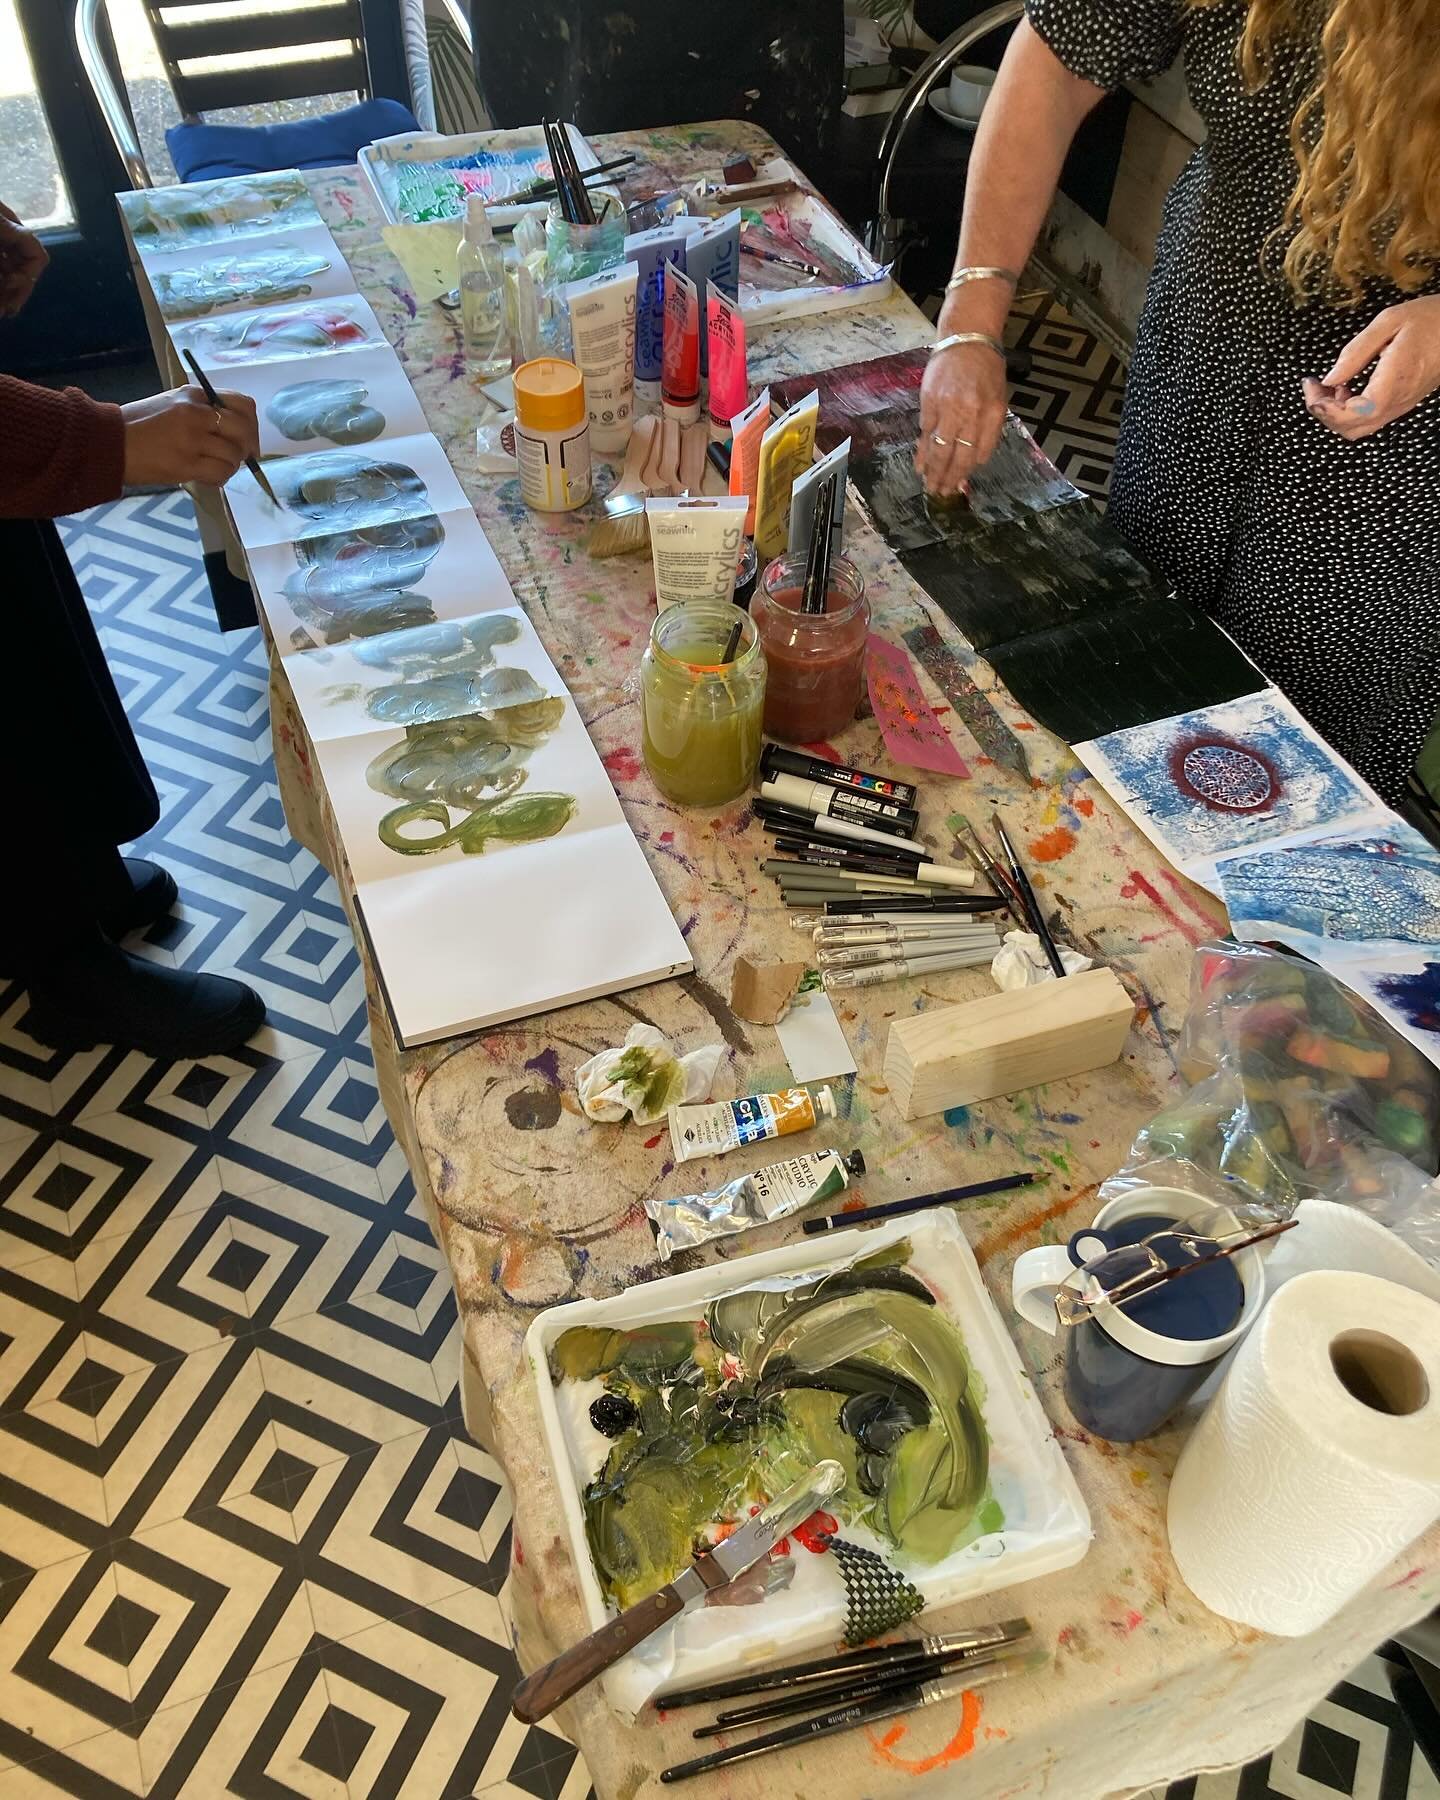 I popped in at the end of our first concertina sketchbook workshop today @themercantileadventurer in Burgess Hill and WOW! What a feast for the eyes. The colours and textures were just incredible.

Super chilled space, with expert guidance from @suzi